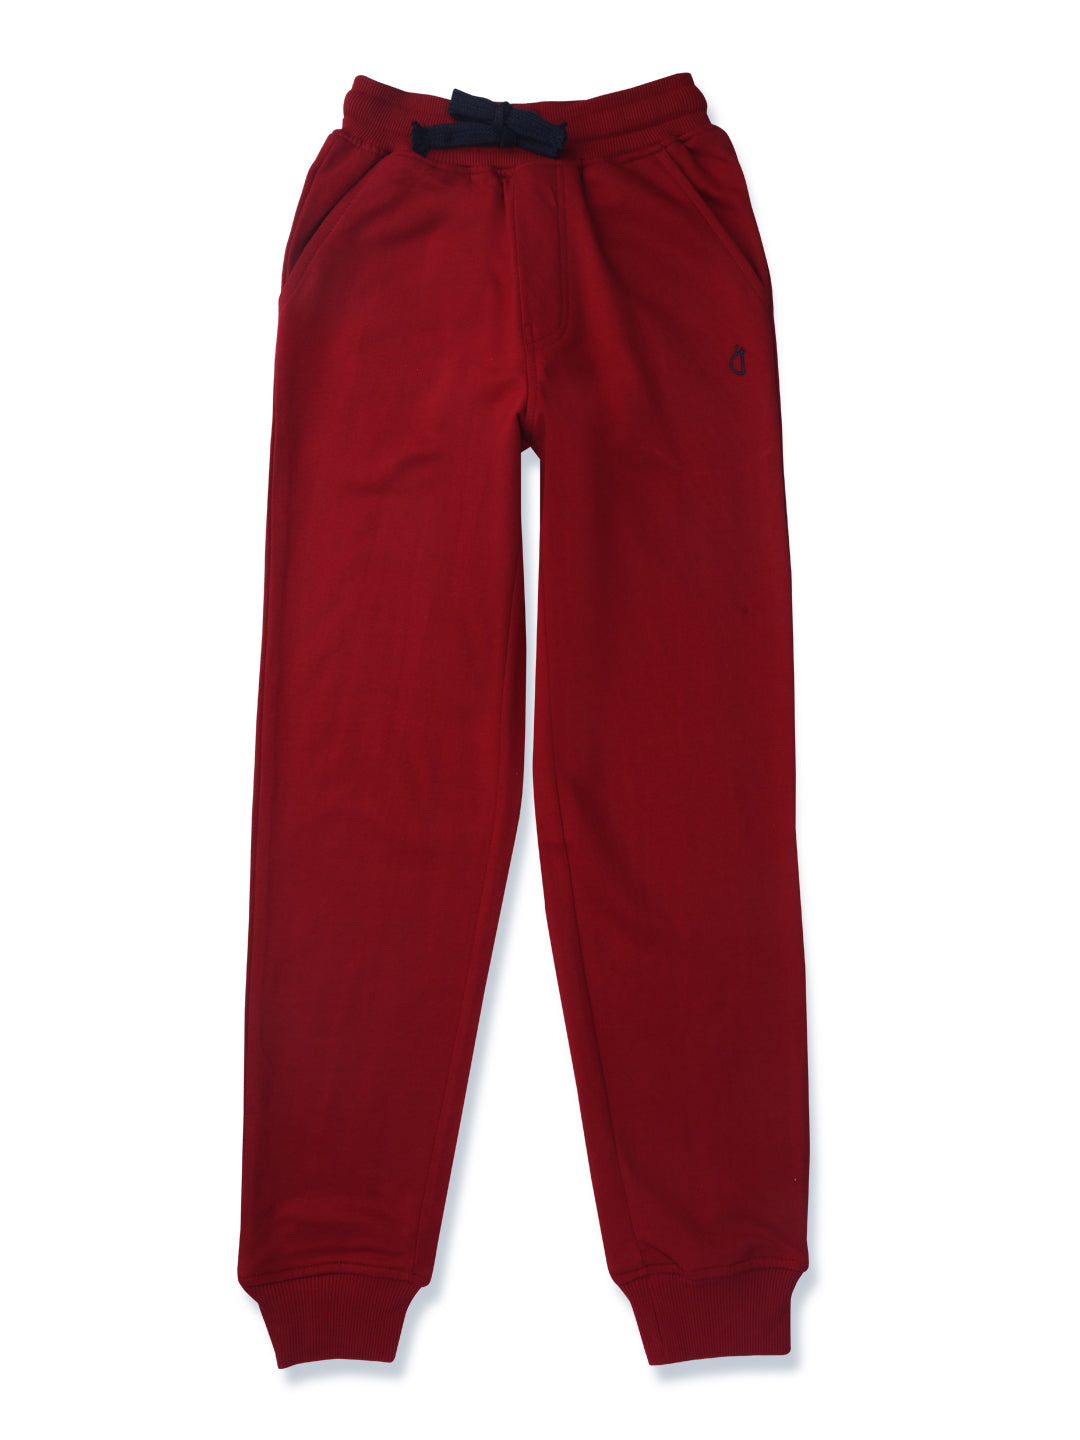 Girls Red Solid Cotton Track Pant